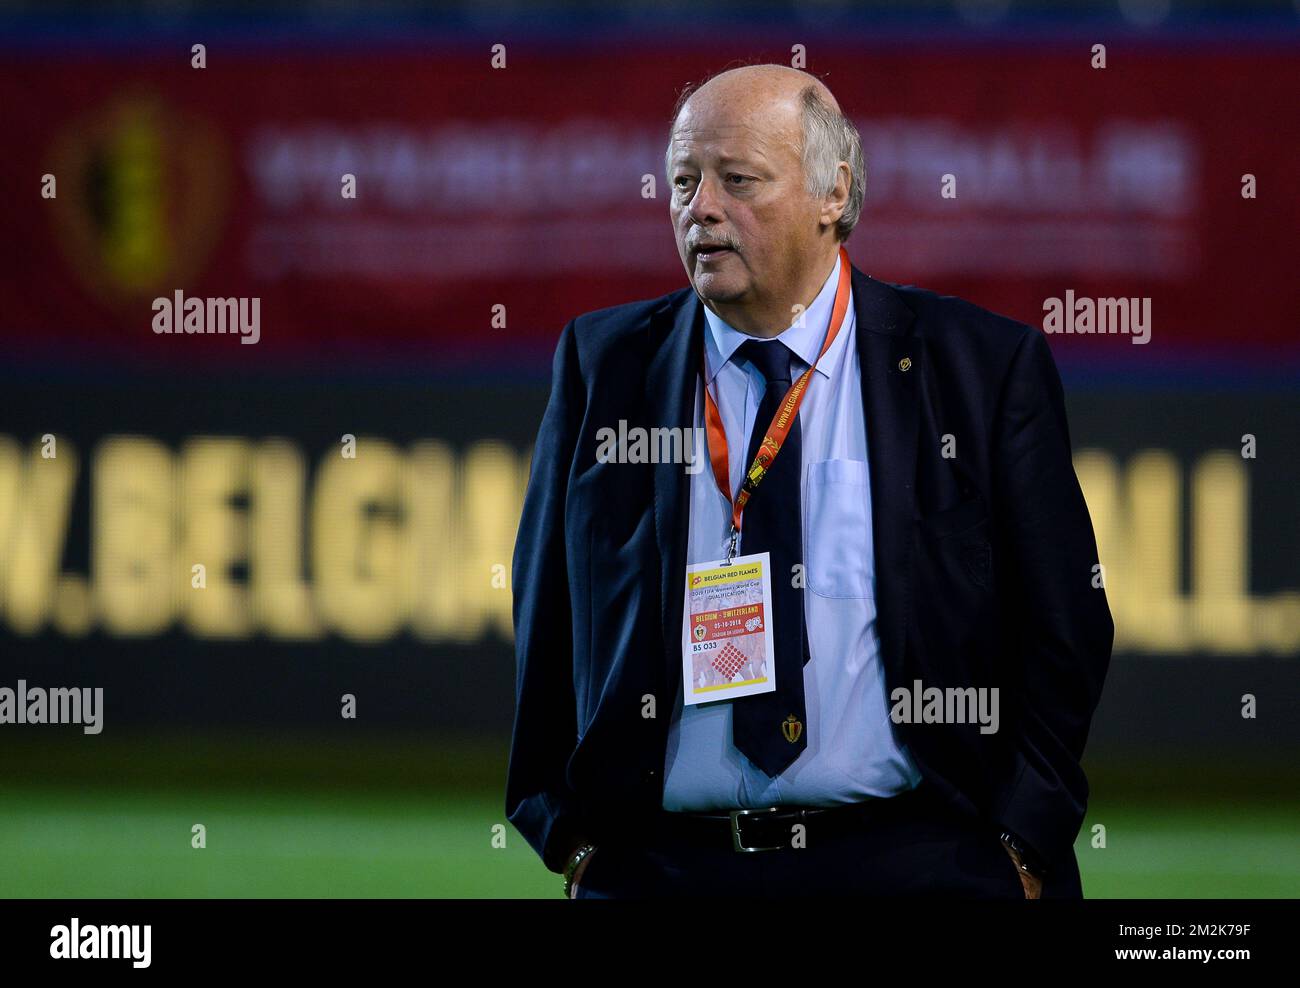 Belgian David Delferiere, new chairman women soccer for the Belgian Football Association pictured prior to a soccer game between Belgium's national team the Red Flames and Switzerland, Friday 05 October 2018, in Leuven, the first leg of the play-offs qualification games for the women's 2019 World Cup. BELGA PHOTO DAVID CATRY Stock Photo